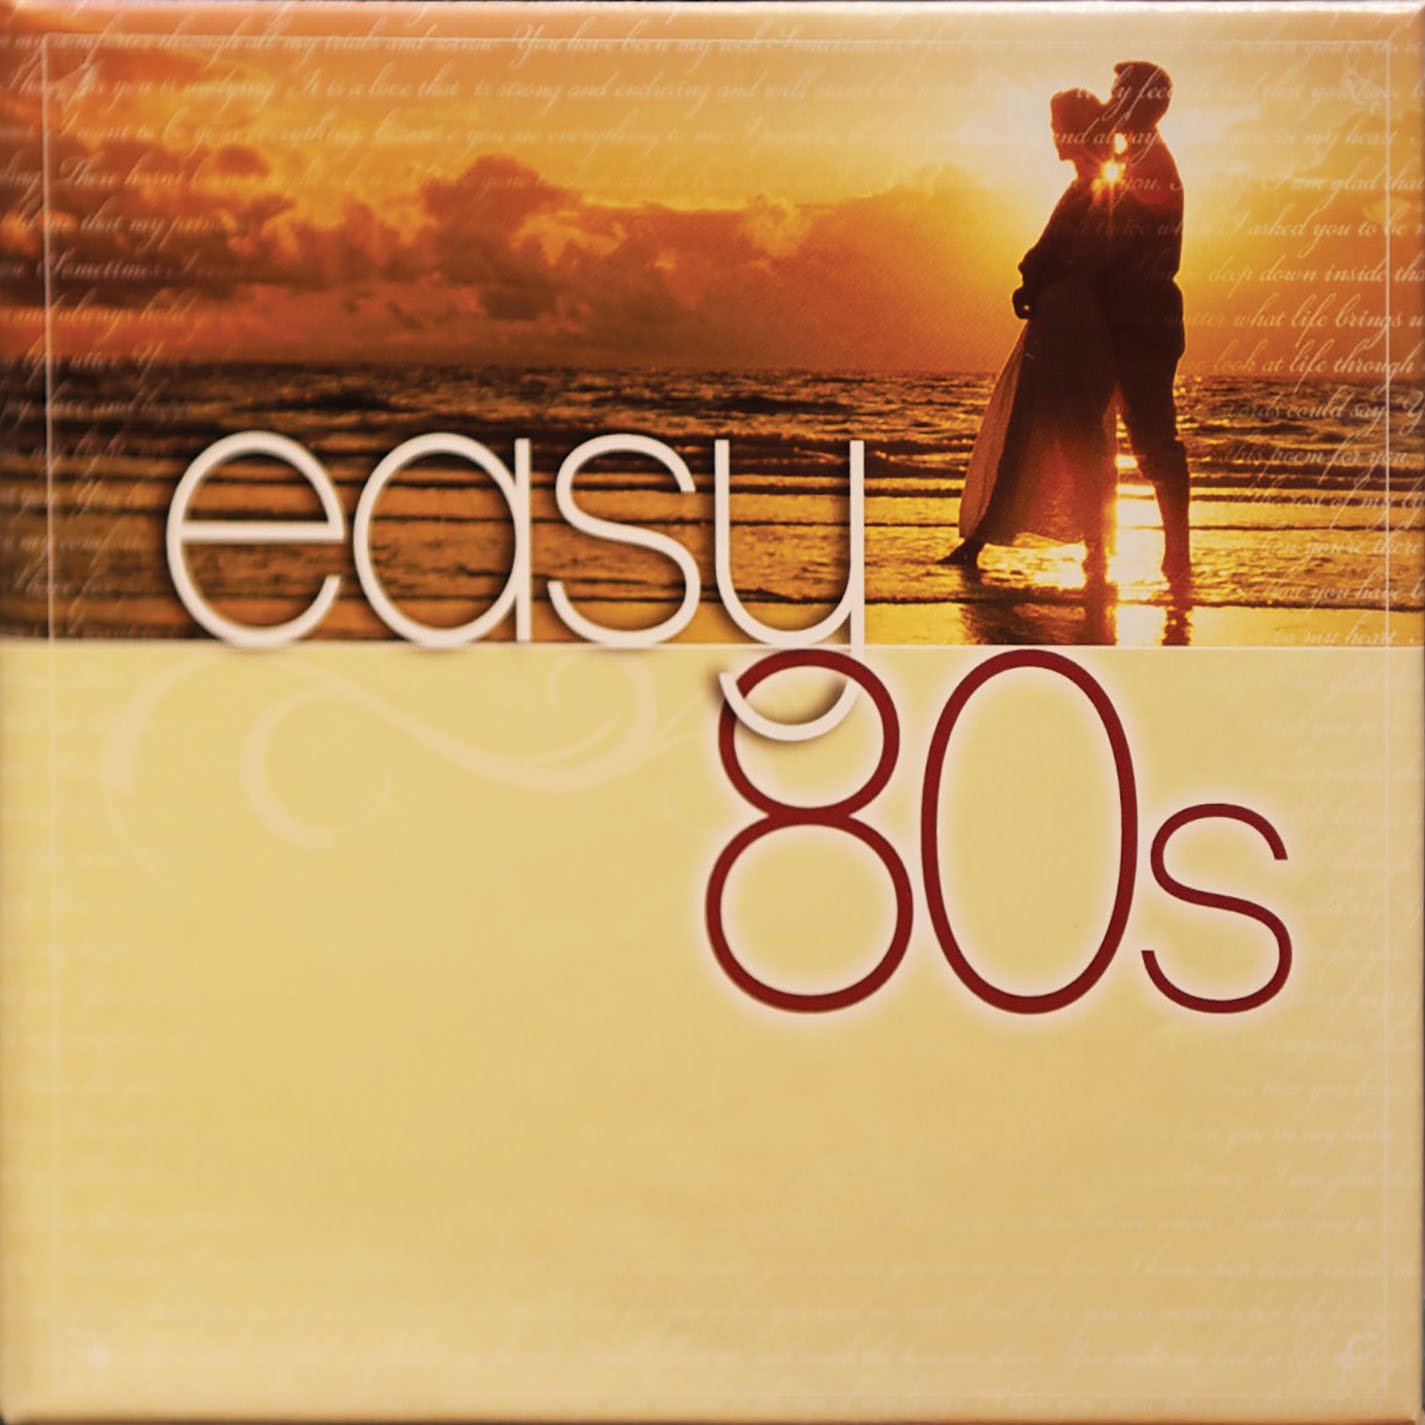 Easy 80s 10 CD Discs Time Life 150 Hits New Sealed